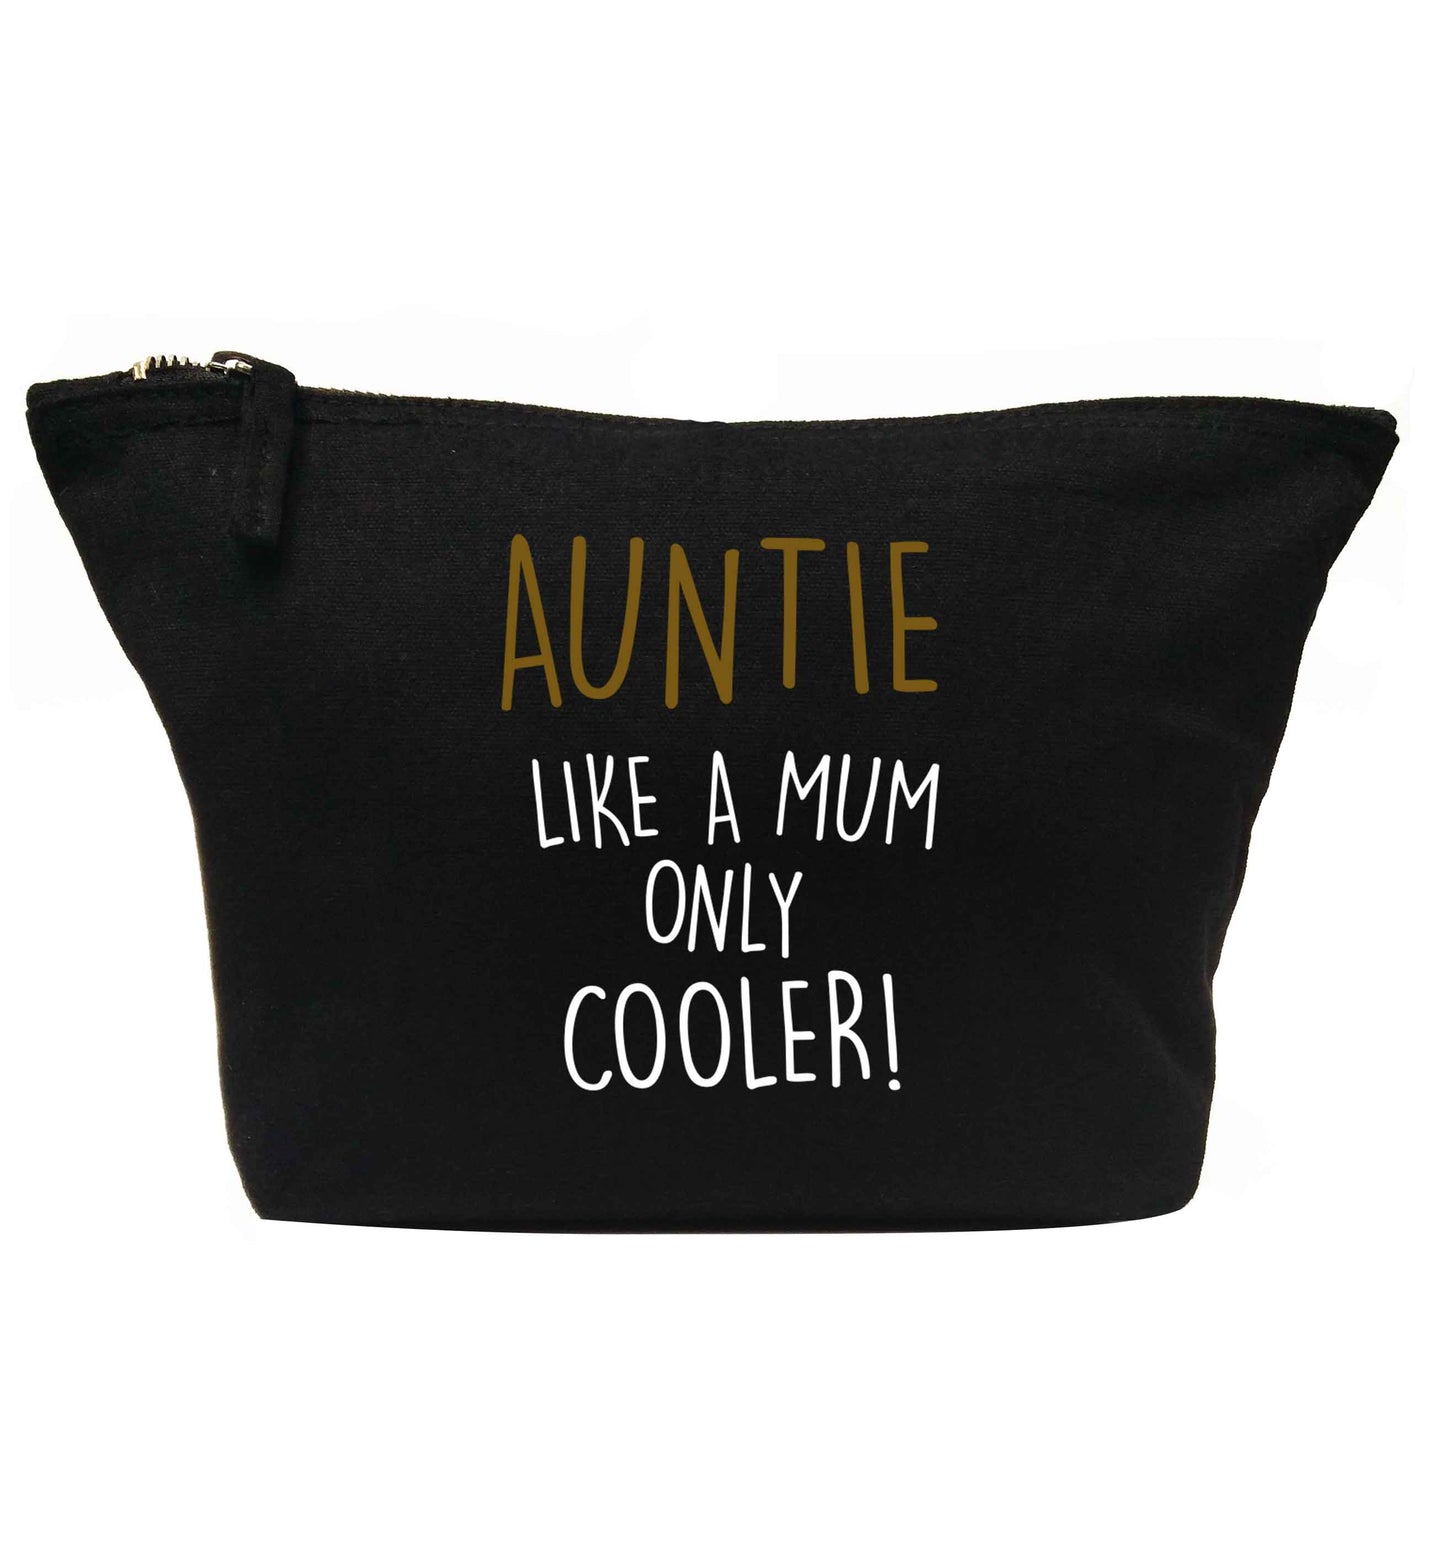 Auntie like a mum only cooler | Makeup / wash bag